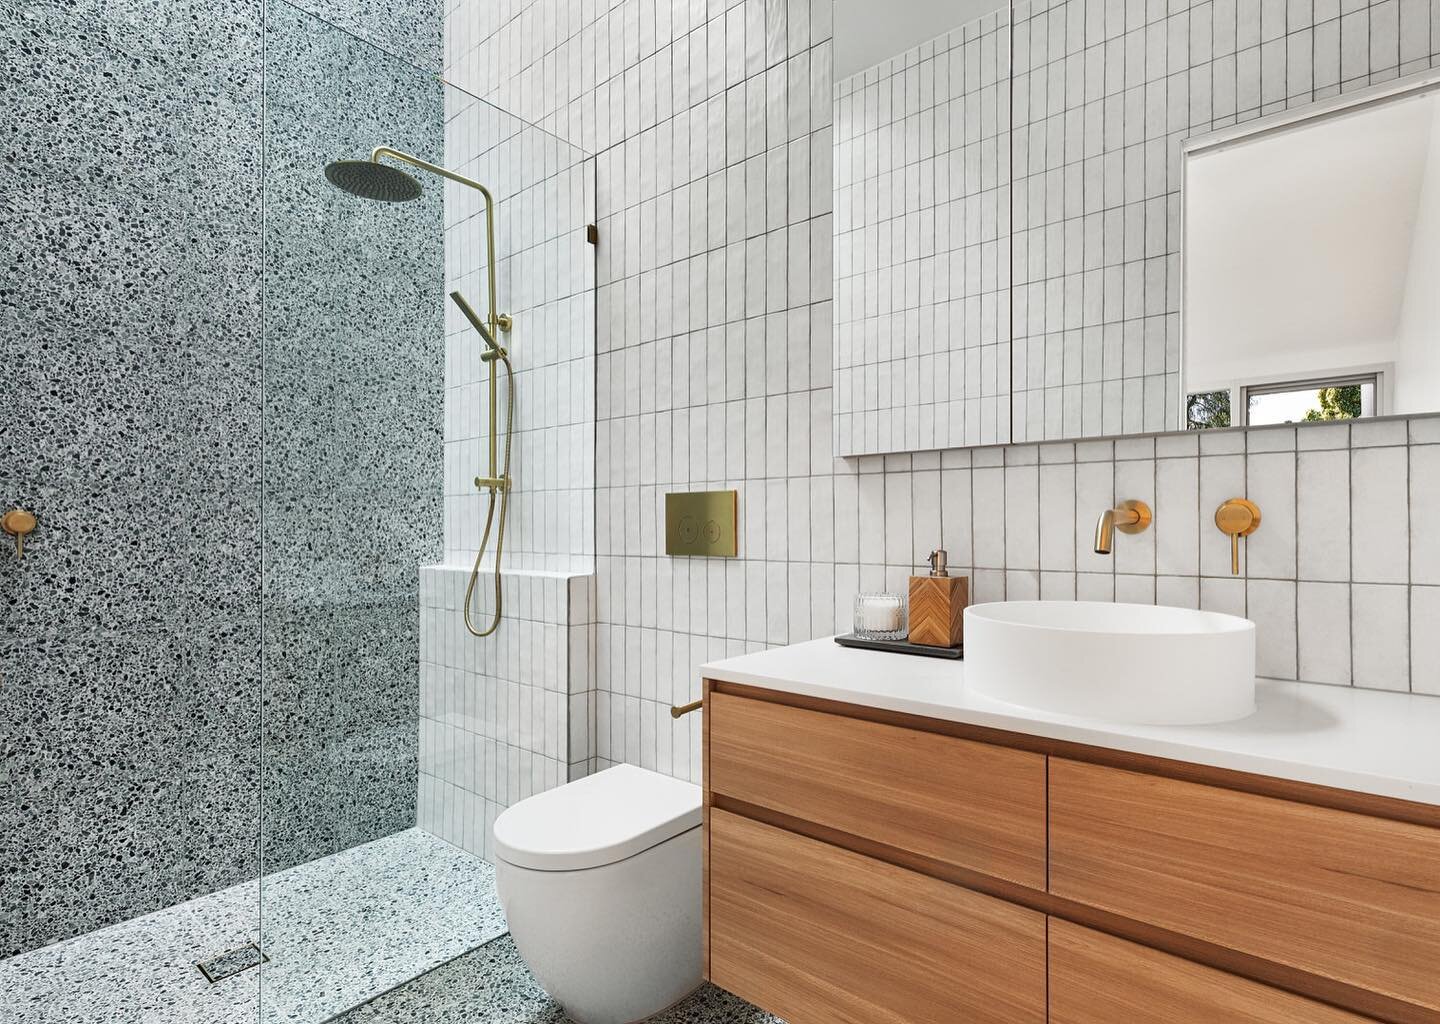 Illuminated by the skylight above, this en-suite successfully heroes a swathe of current bathroom trends, bringing modern beauty to a traditionally functional space.
.
.
.
PM &amp; construct: @matclair_constructions 
Tapware: @abiinteriors 
Tiles: @n